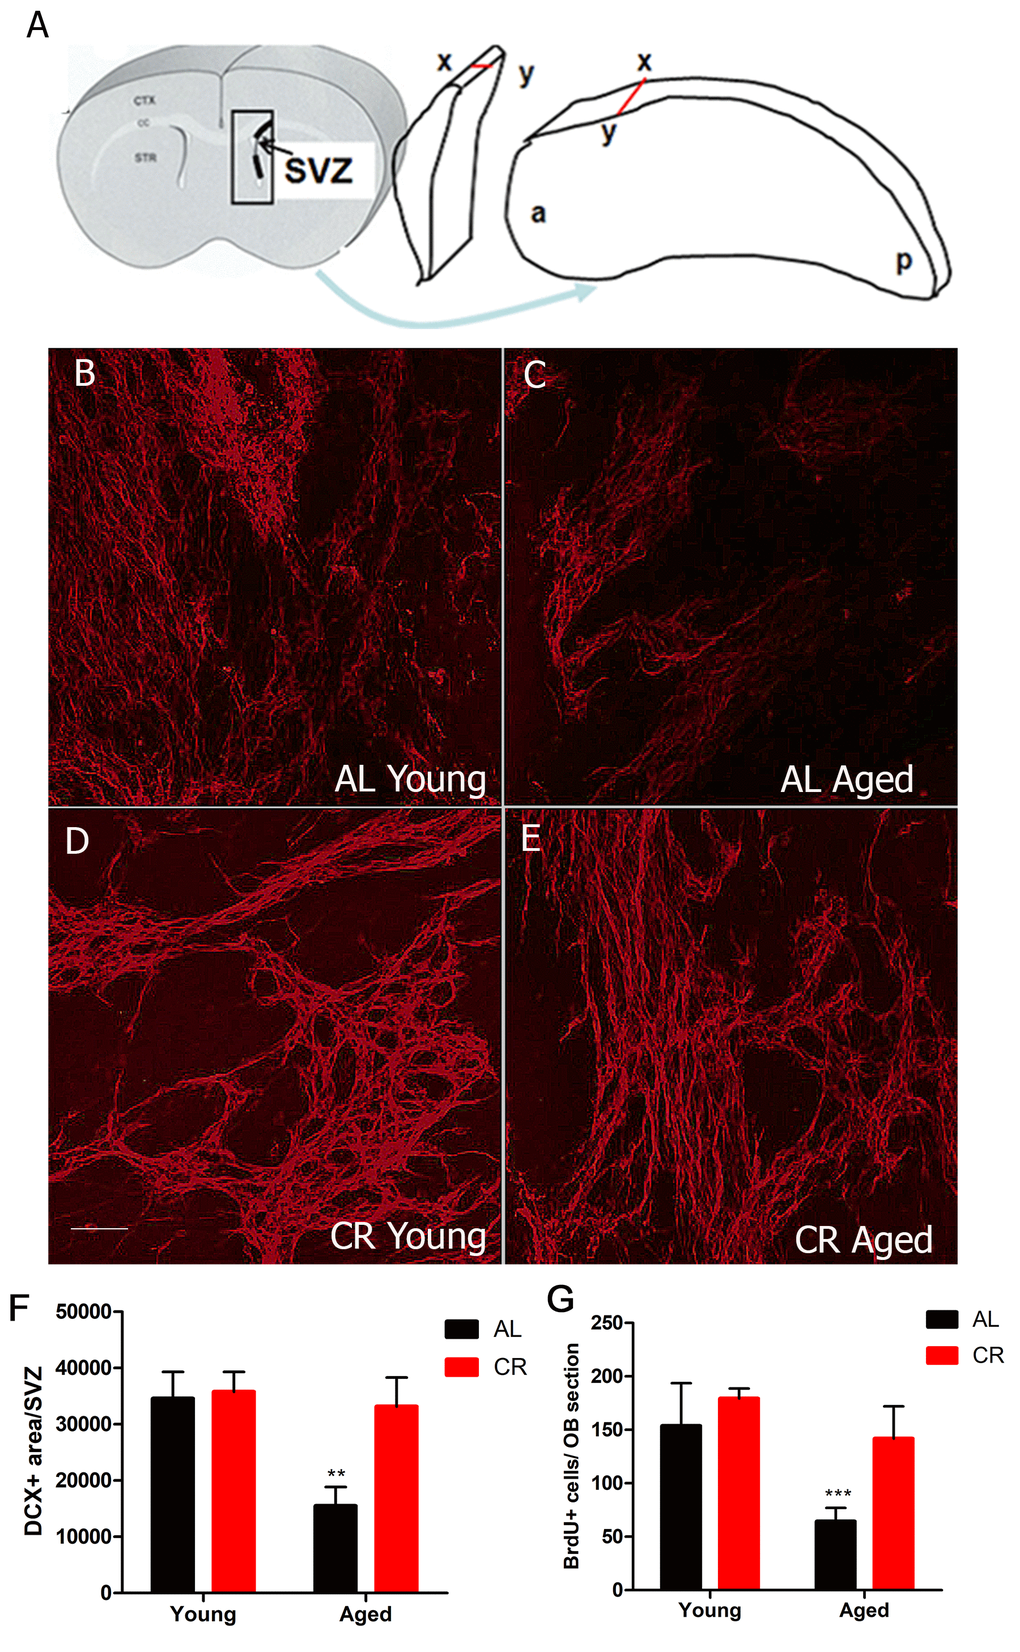 Calorie restriction protects against the loss of neurogenesis in the aged SVZ. (A) Cartoon showing the 3-dimensionally preserved SVZ wholemount. (B-E) Confocal projection images of immunohistochemistry for the neuroblast marker DCX performed on SVZ wholemounts in young and aged AL and CR mice. (F) Quantification of the amount of DCX immunostaining for the different groups. (G) Quantification of the number of BrdU+ cell in the olfactory bulb two weeks after BrdU injection. *** = p